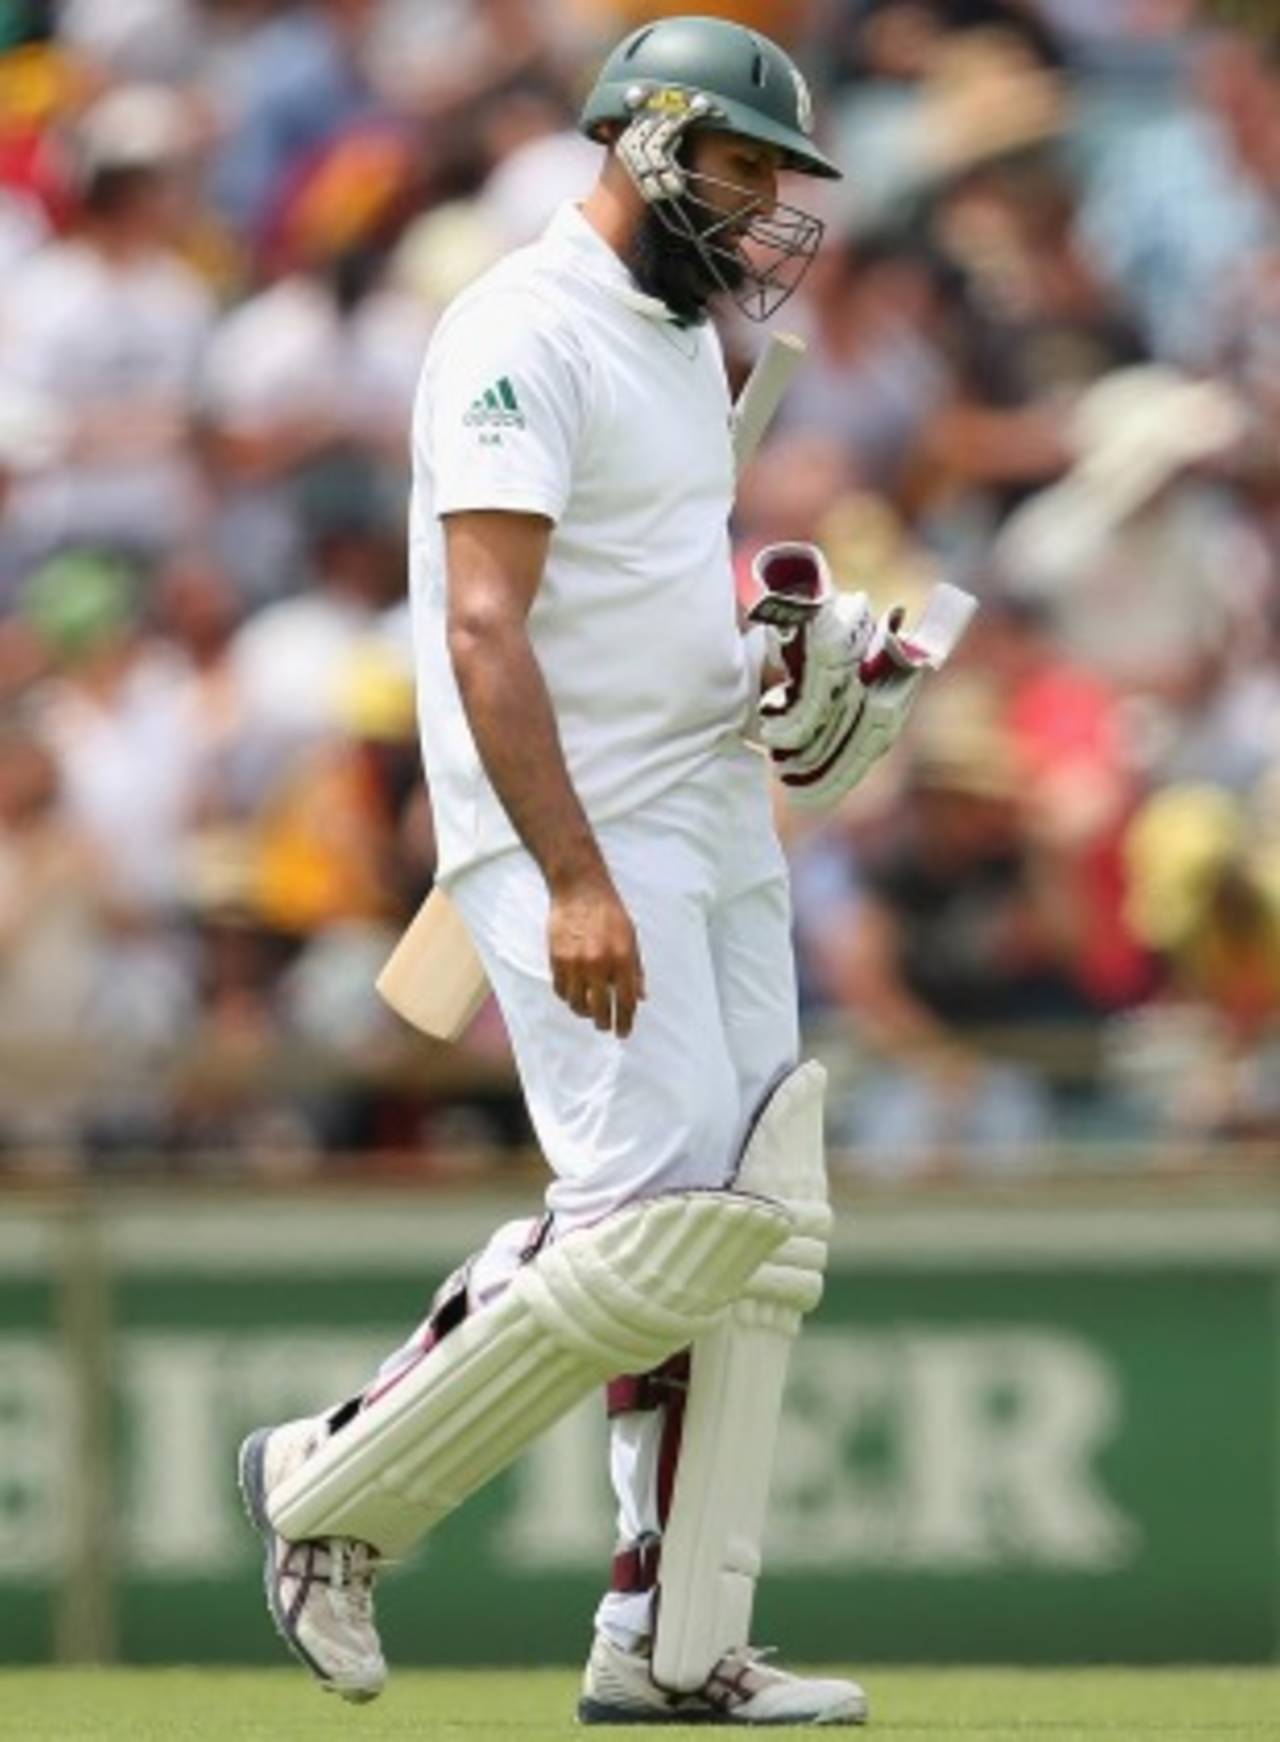 Hashim Amla's first innings run-out by a single video frame would not even have needed a third umpire decision if he had started behind the line&nbsp;&nbsp;&bull;&nbsp;&nbsp;Getty Images